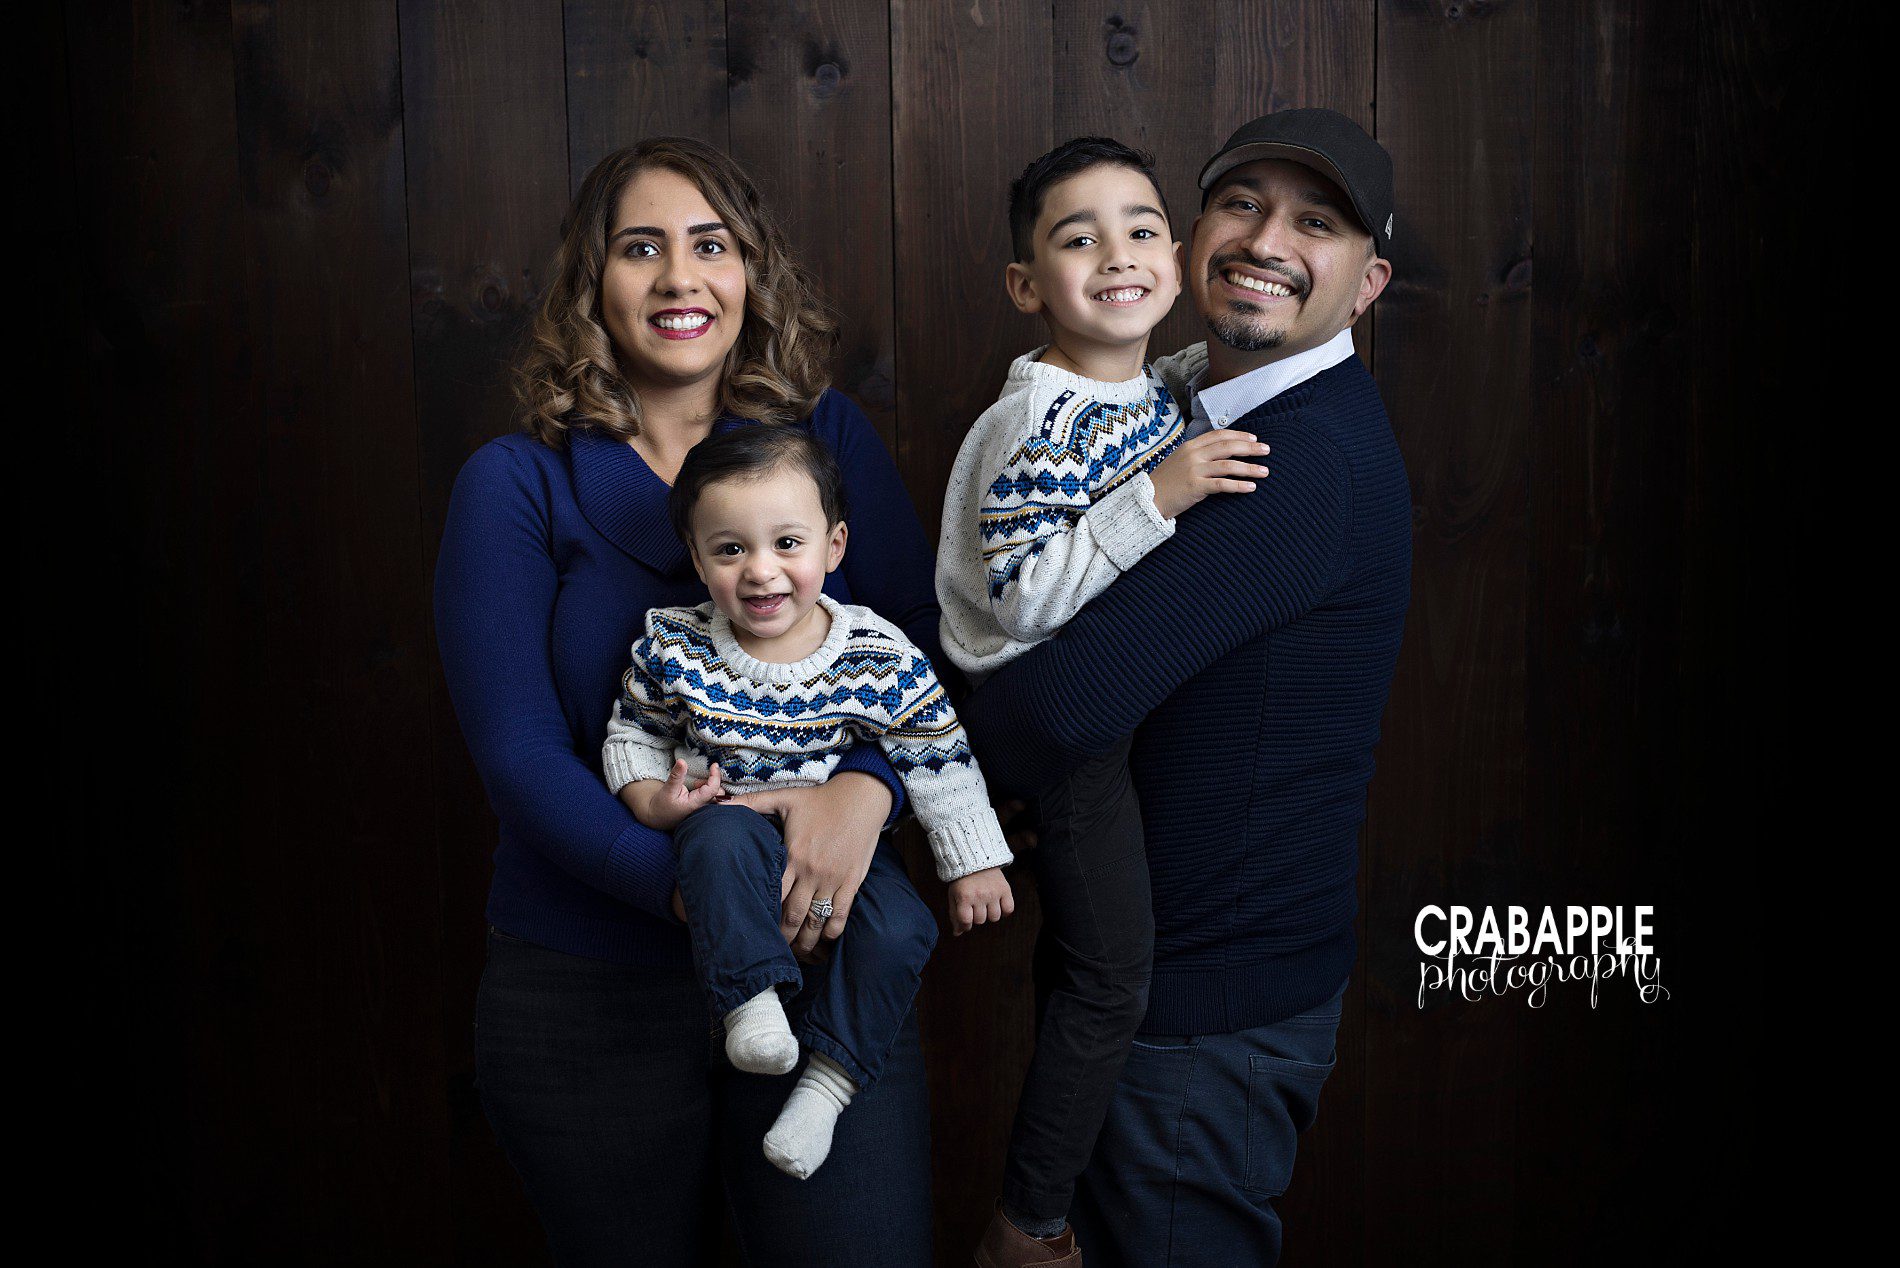 Family portrait ideas using blue as a styling color